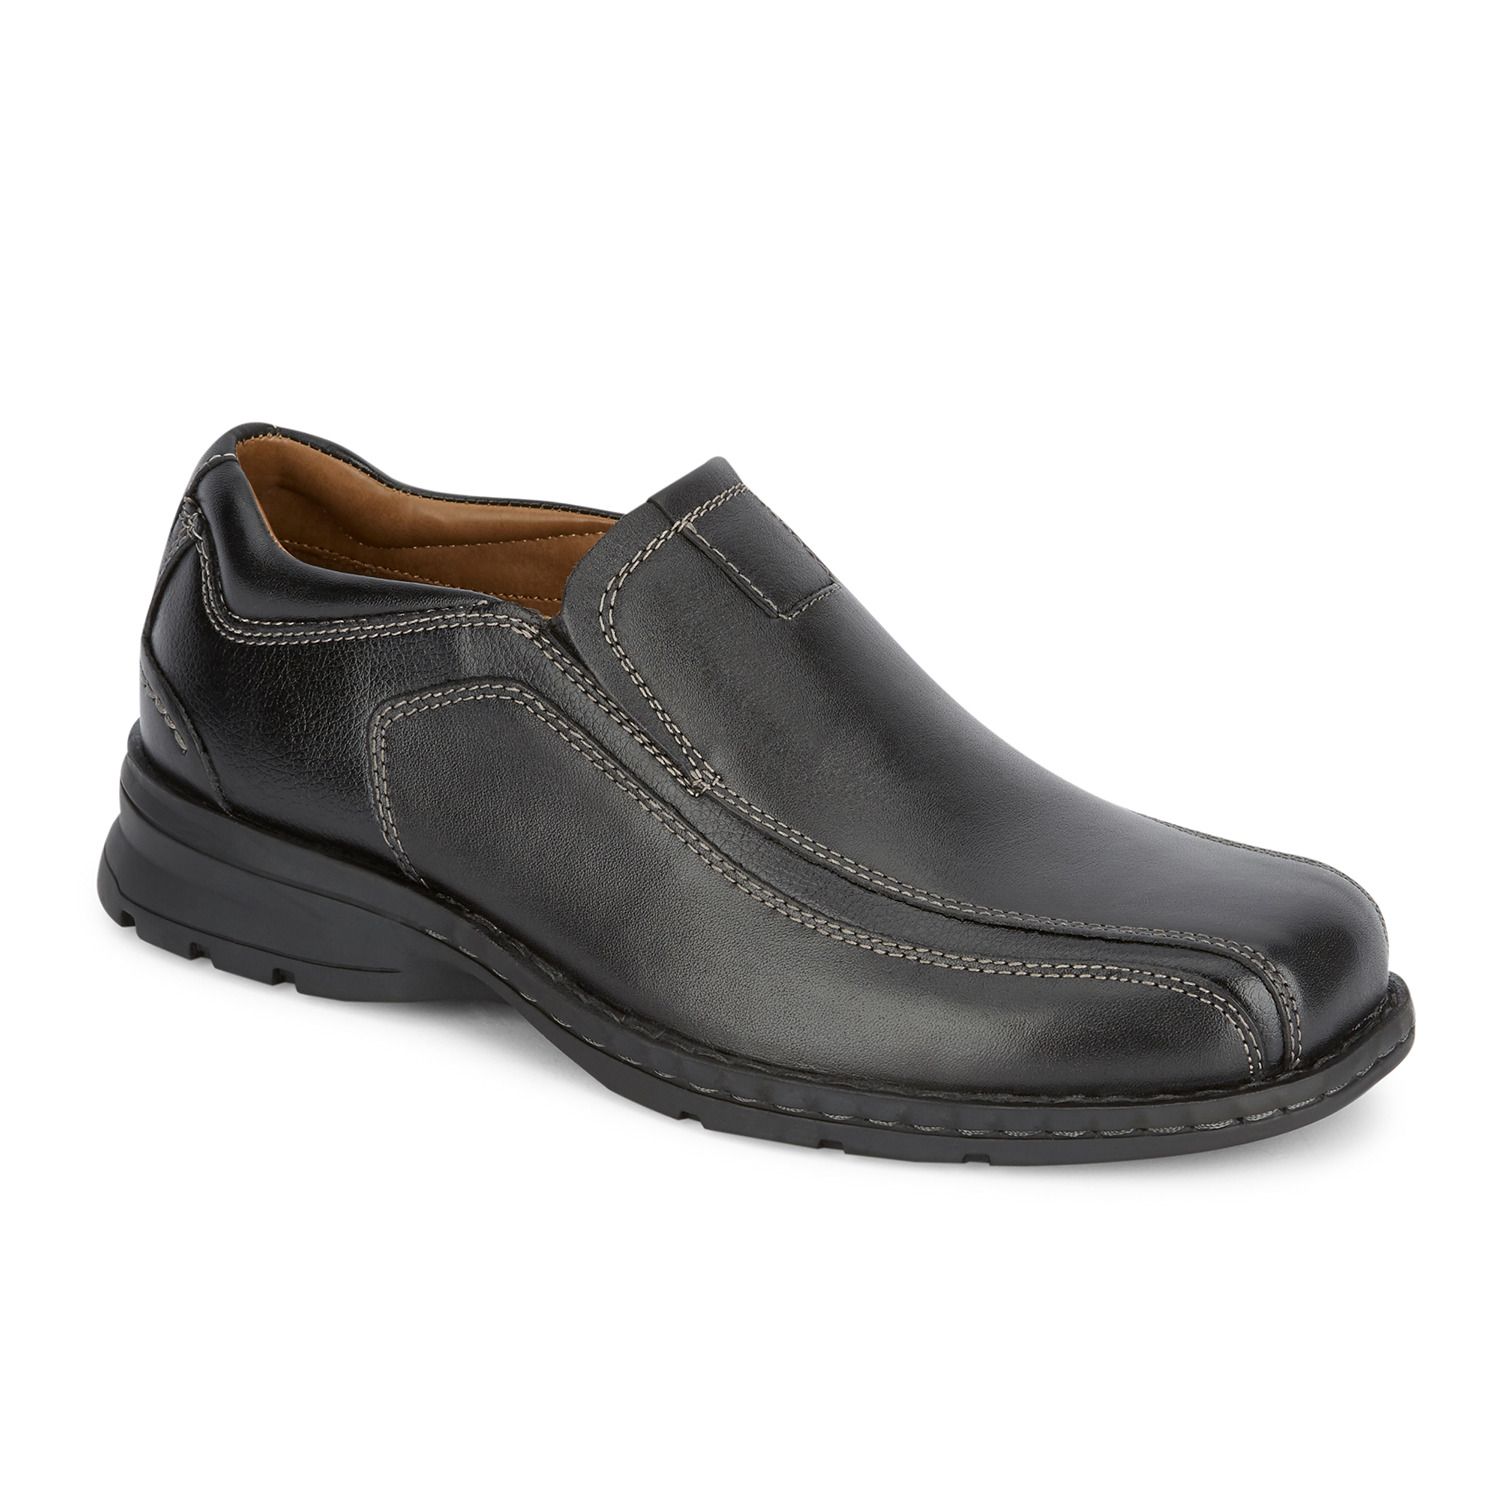 Agent Men's Leather Casual Slip-On Shoes